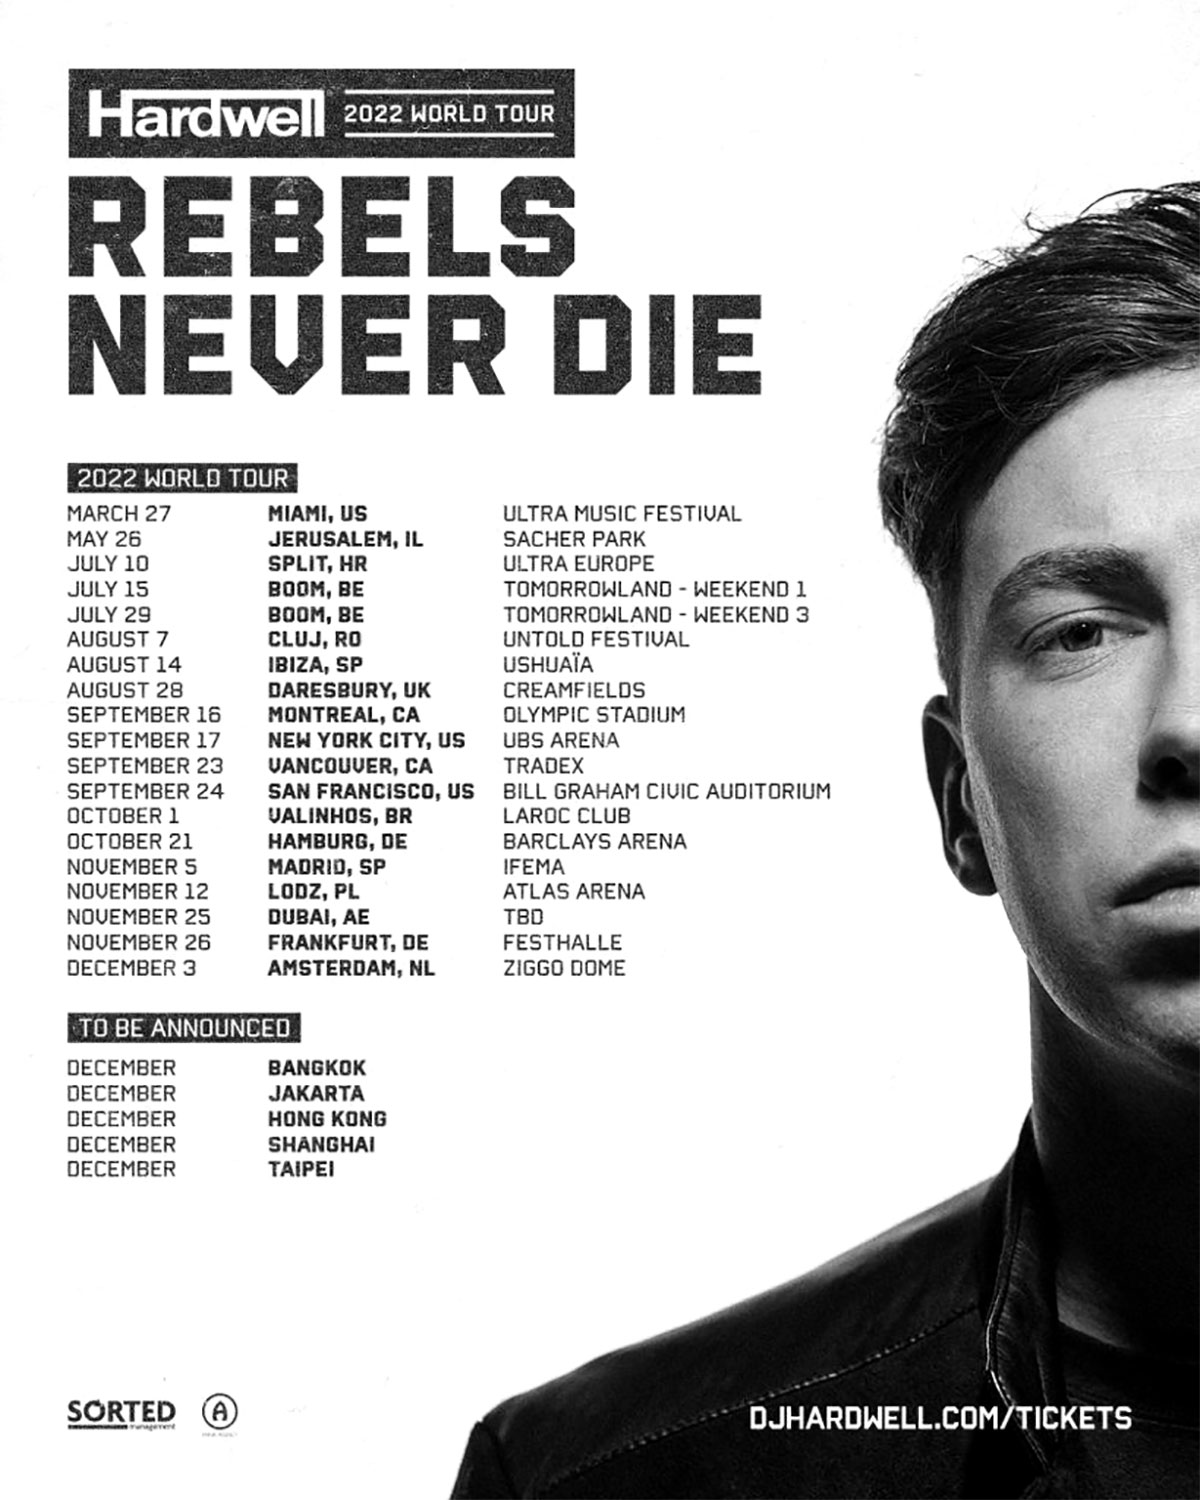 hardwell-rebels-never-die-tour-2022-world-tour-dates